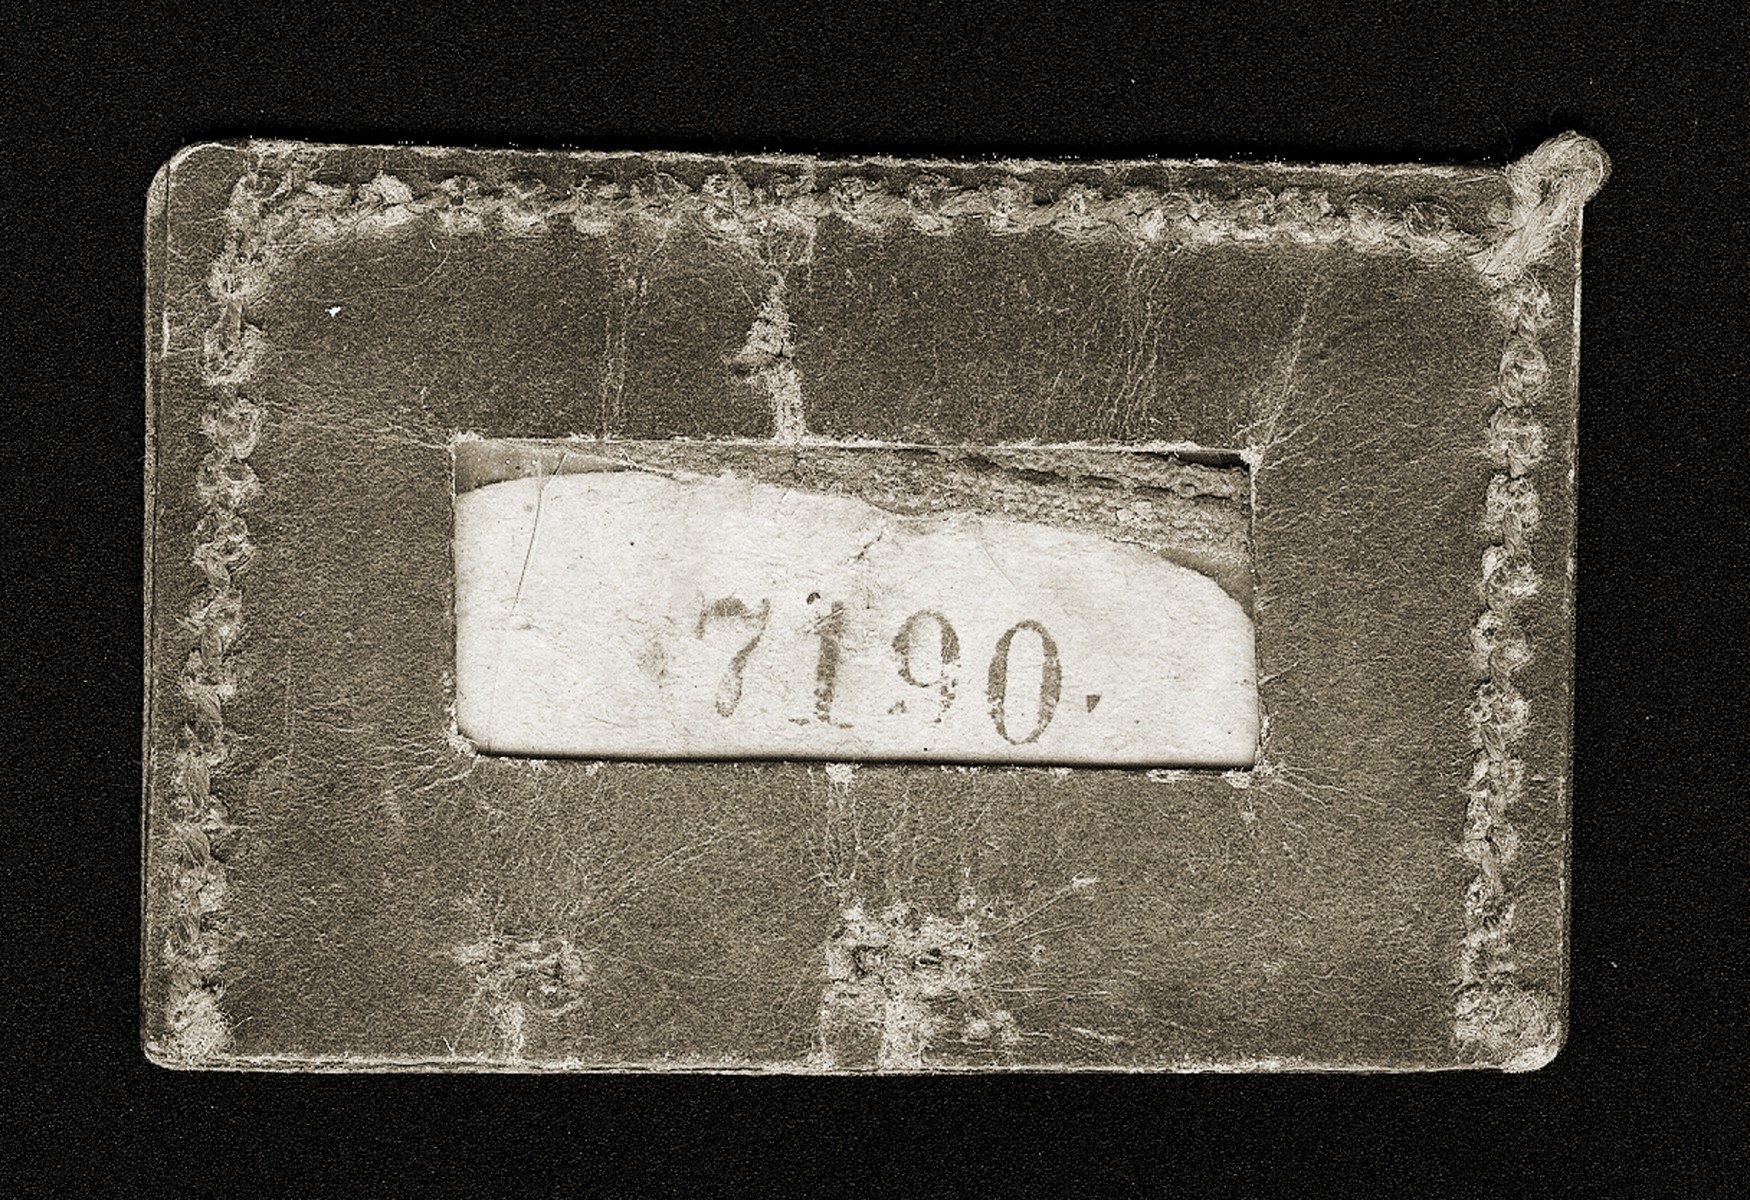 An identification tag issued to Gina Tabaczynska, when she was detained with other employees of the Schultz & Co. factory in the Warsaw ghetto in the summer of 1942.  Those who held these numbers were presumed to be exempt from deportation.